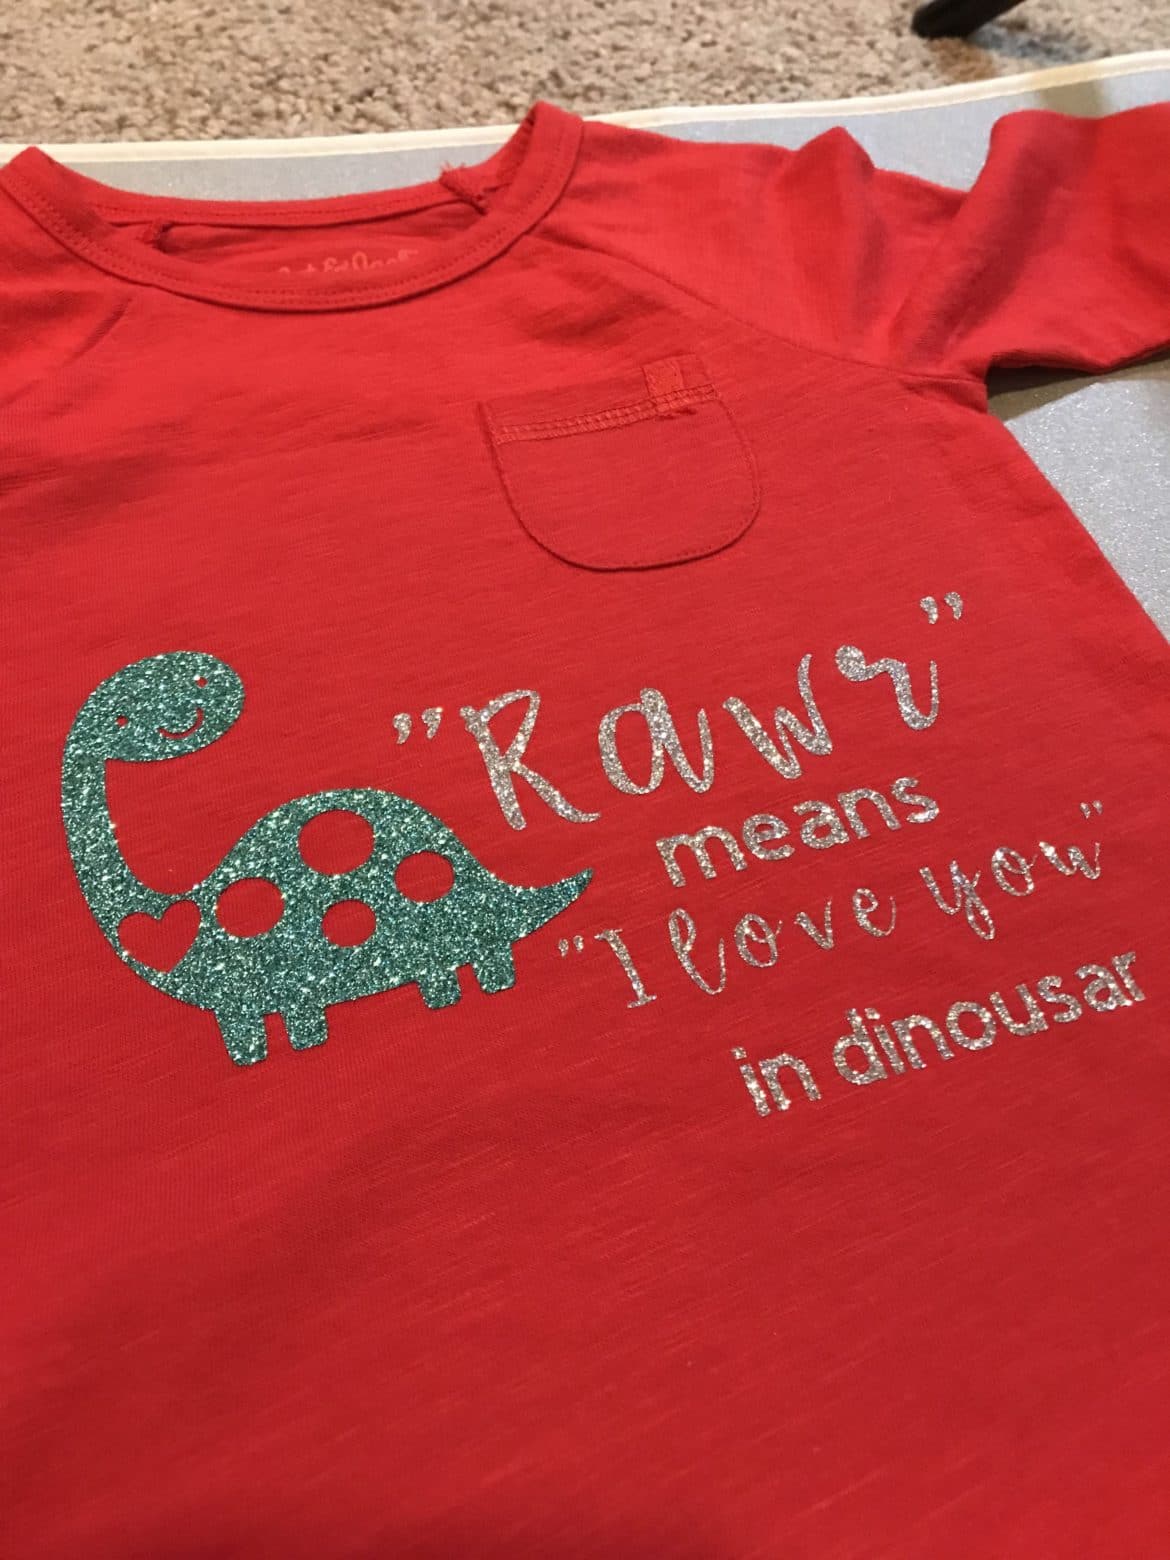 rawr means I love you in dinosaur